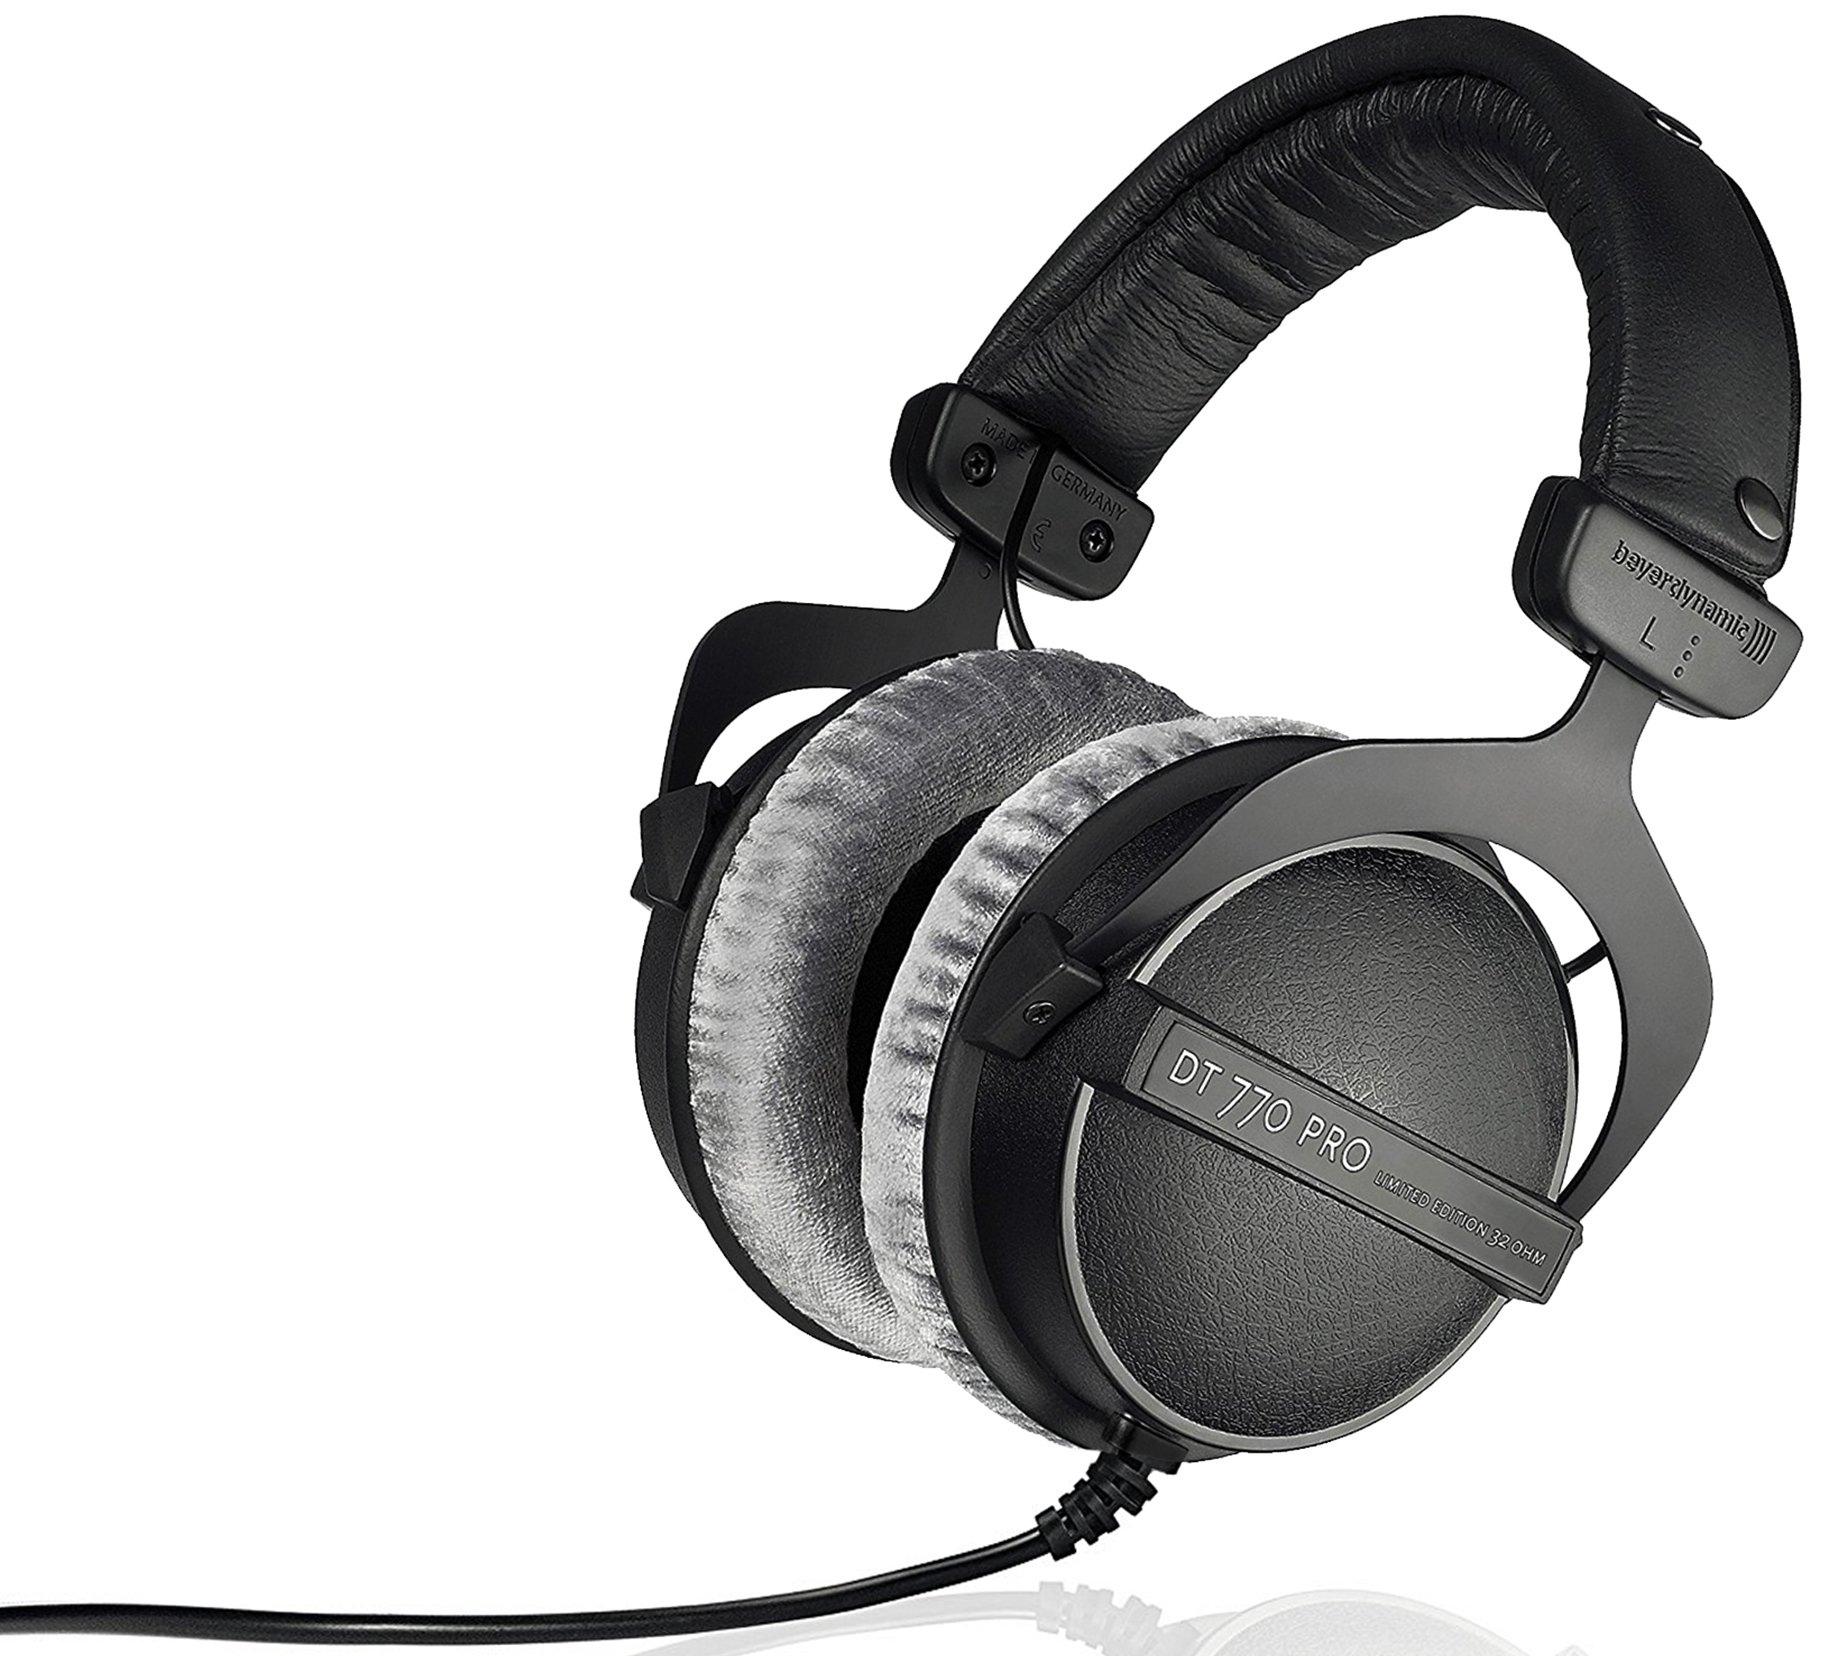 BeyerDynamic DT 770 Pro Studio Headphones - Over-Ear, Closed-Back, Professional Design for Recording and Monitoring